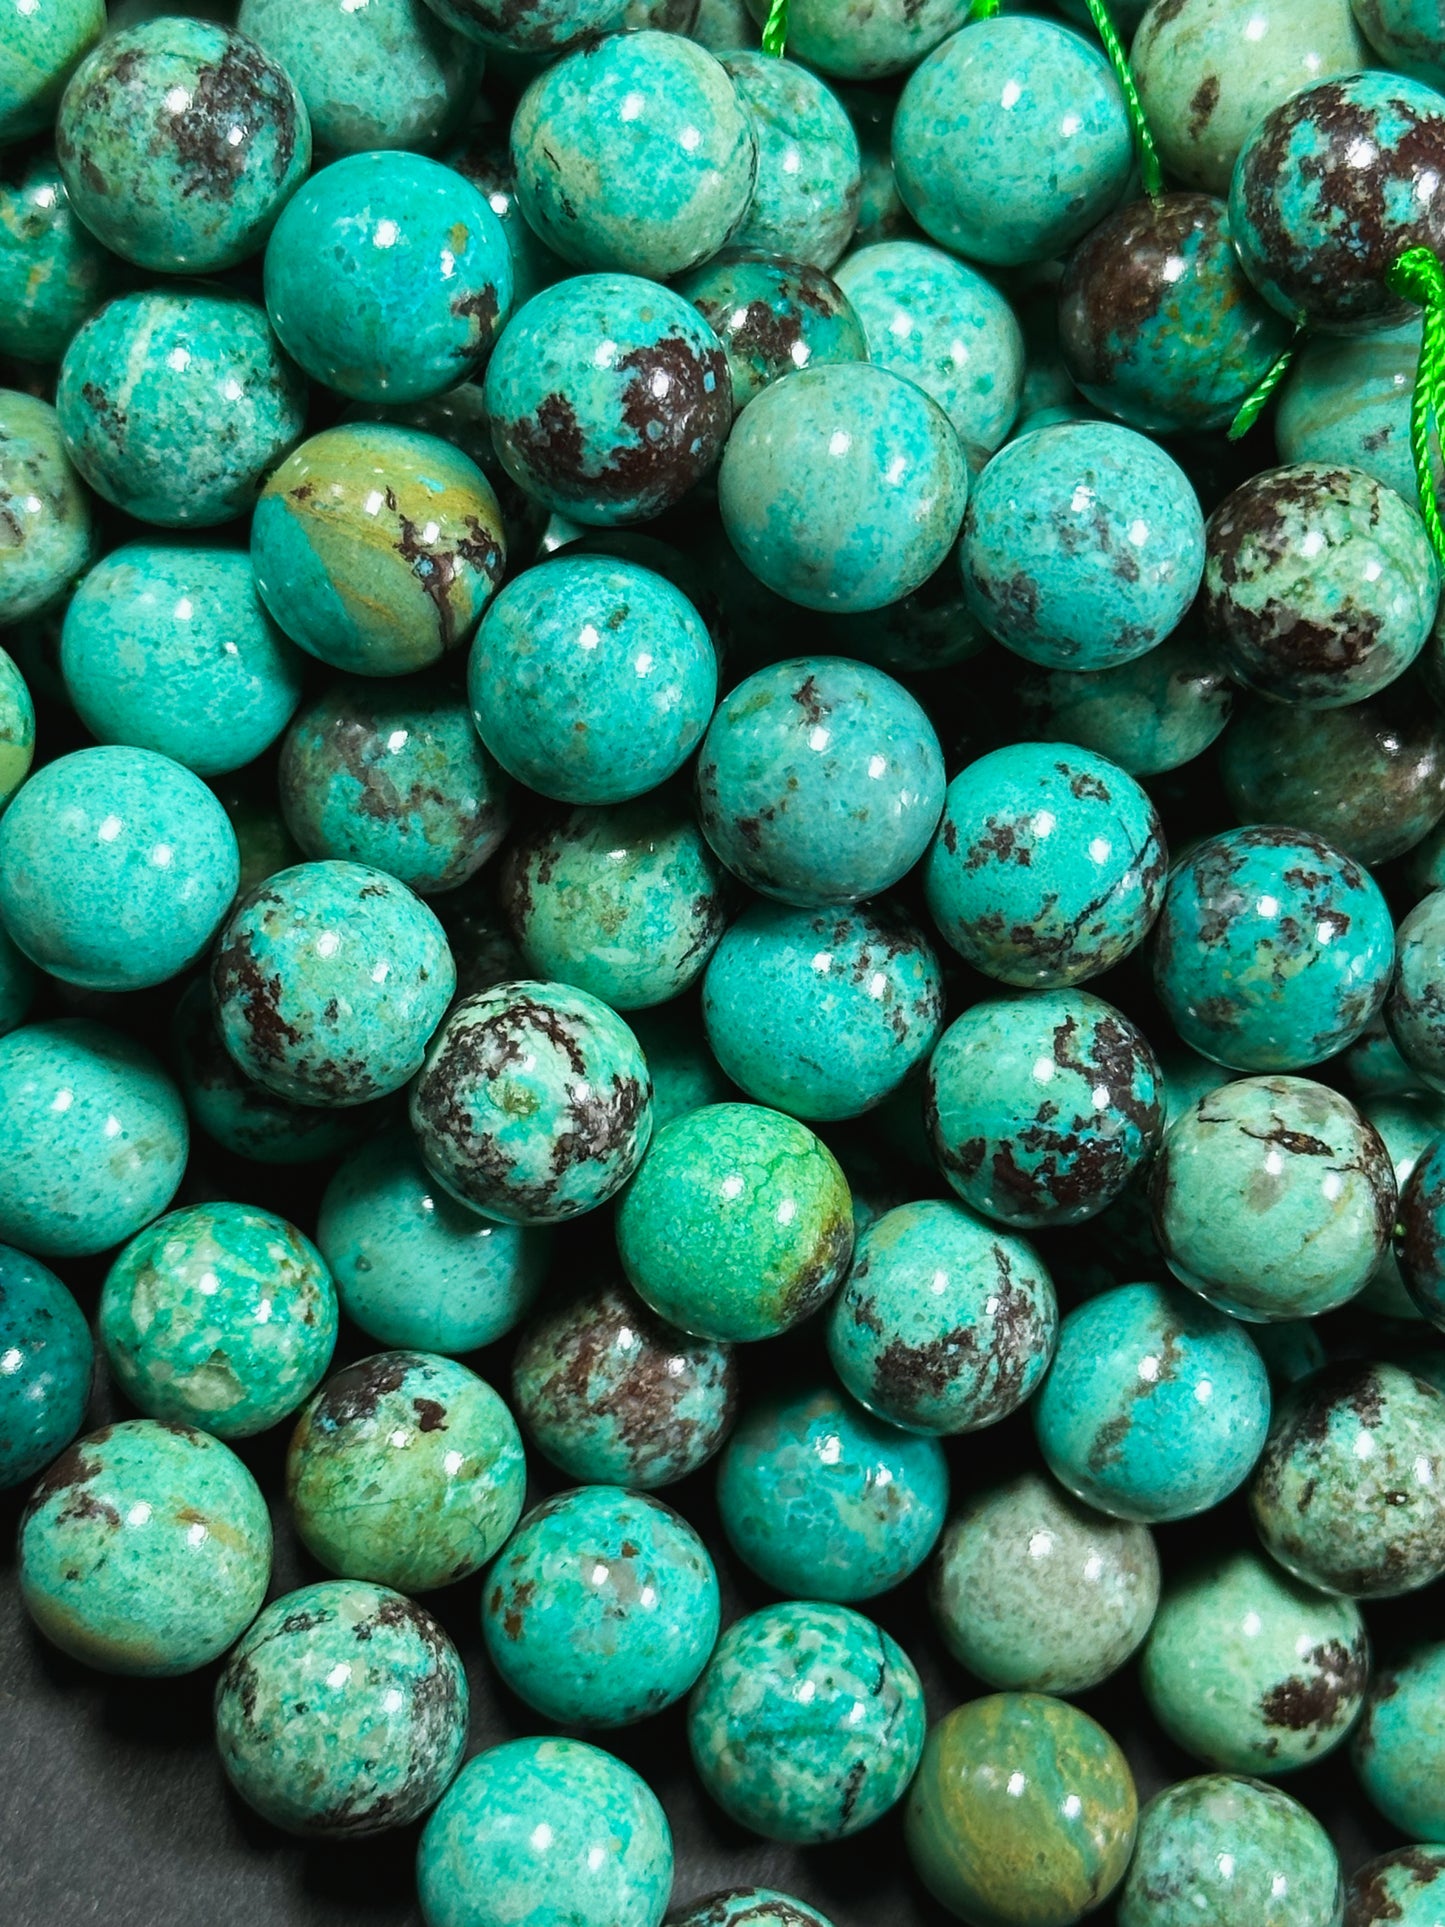 AAA Natural Genuine Turquoise Gemstone Bead 6mm 8mm 10mm Round Bead, Gorgeous Green Turquoise Color, Excellent Quality Turquoise Beads 15.5"